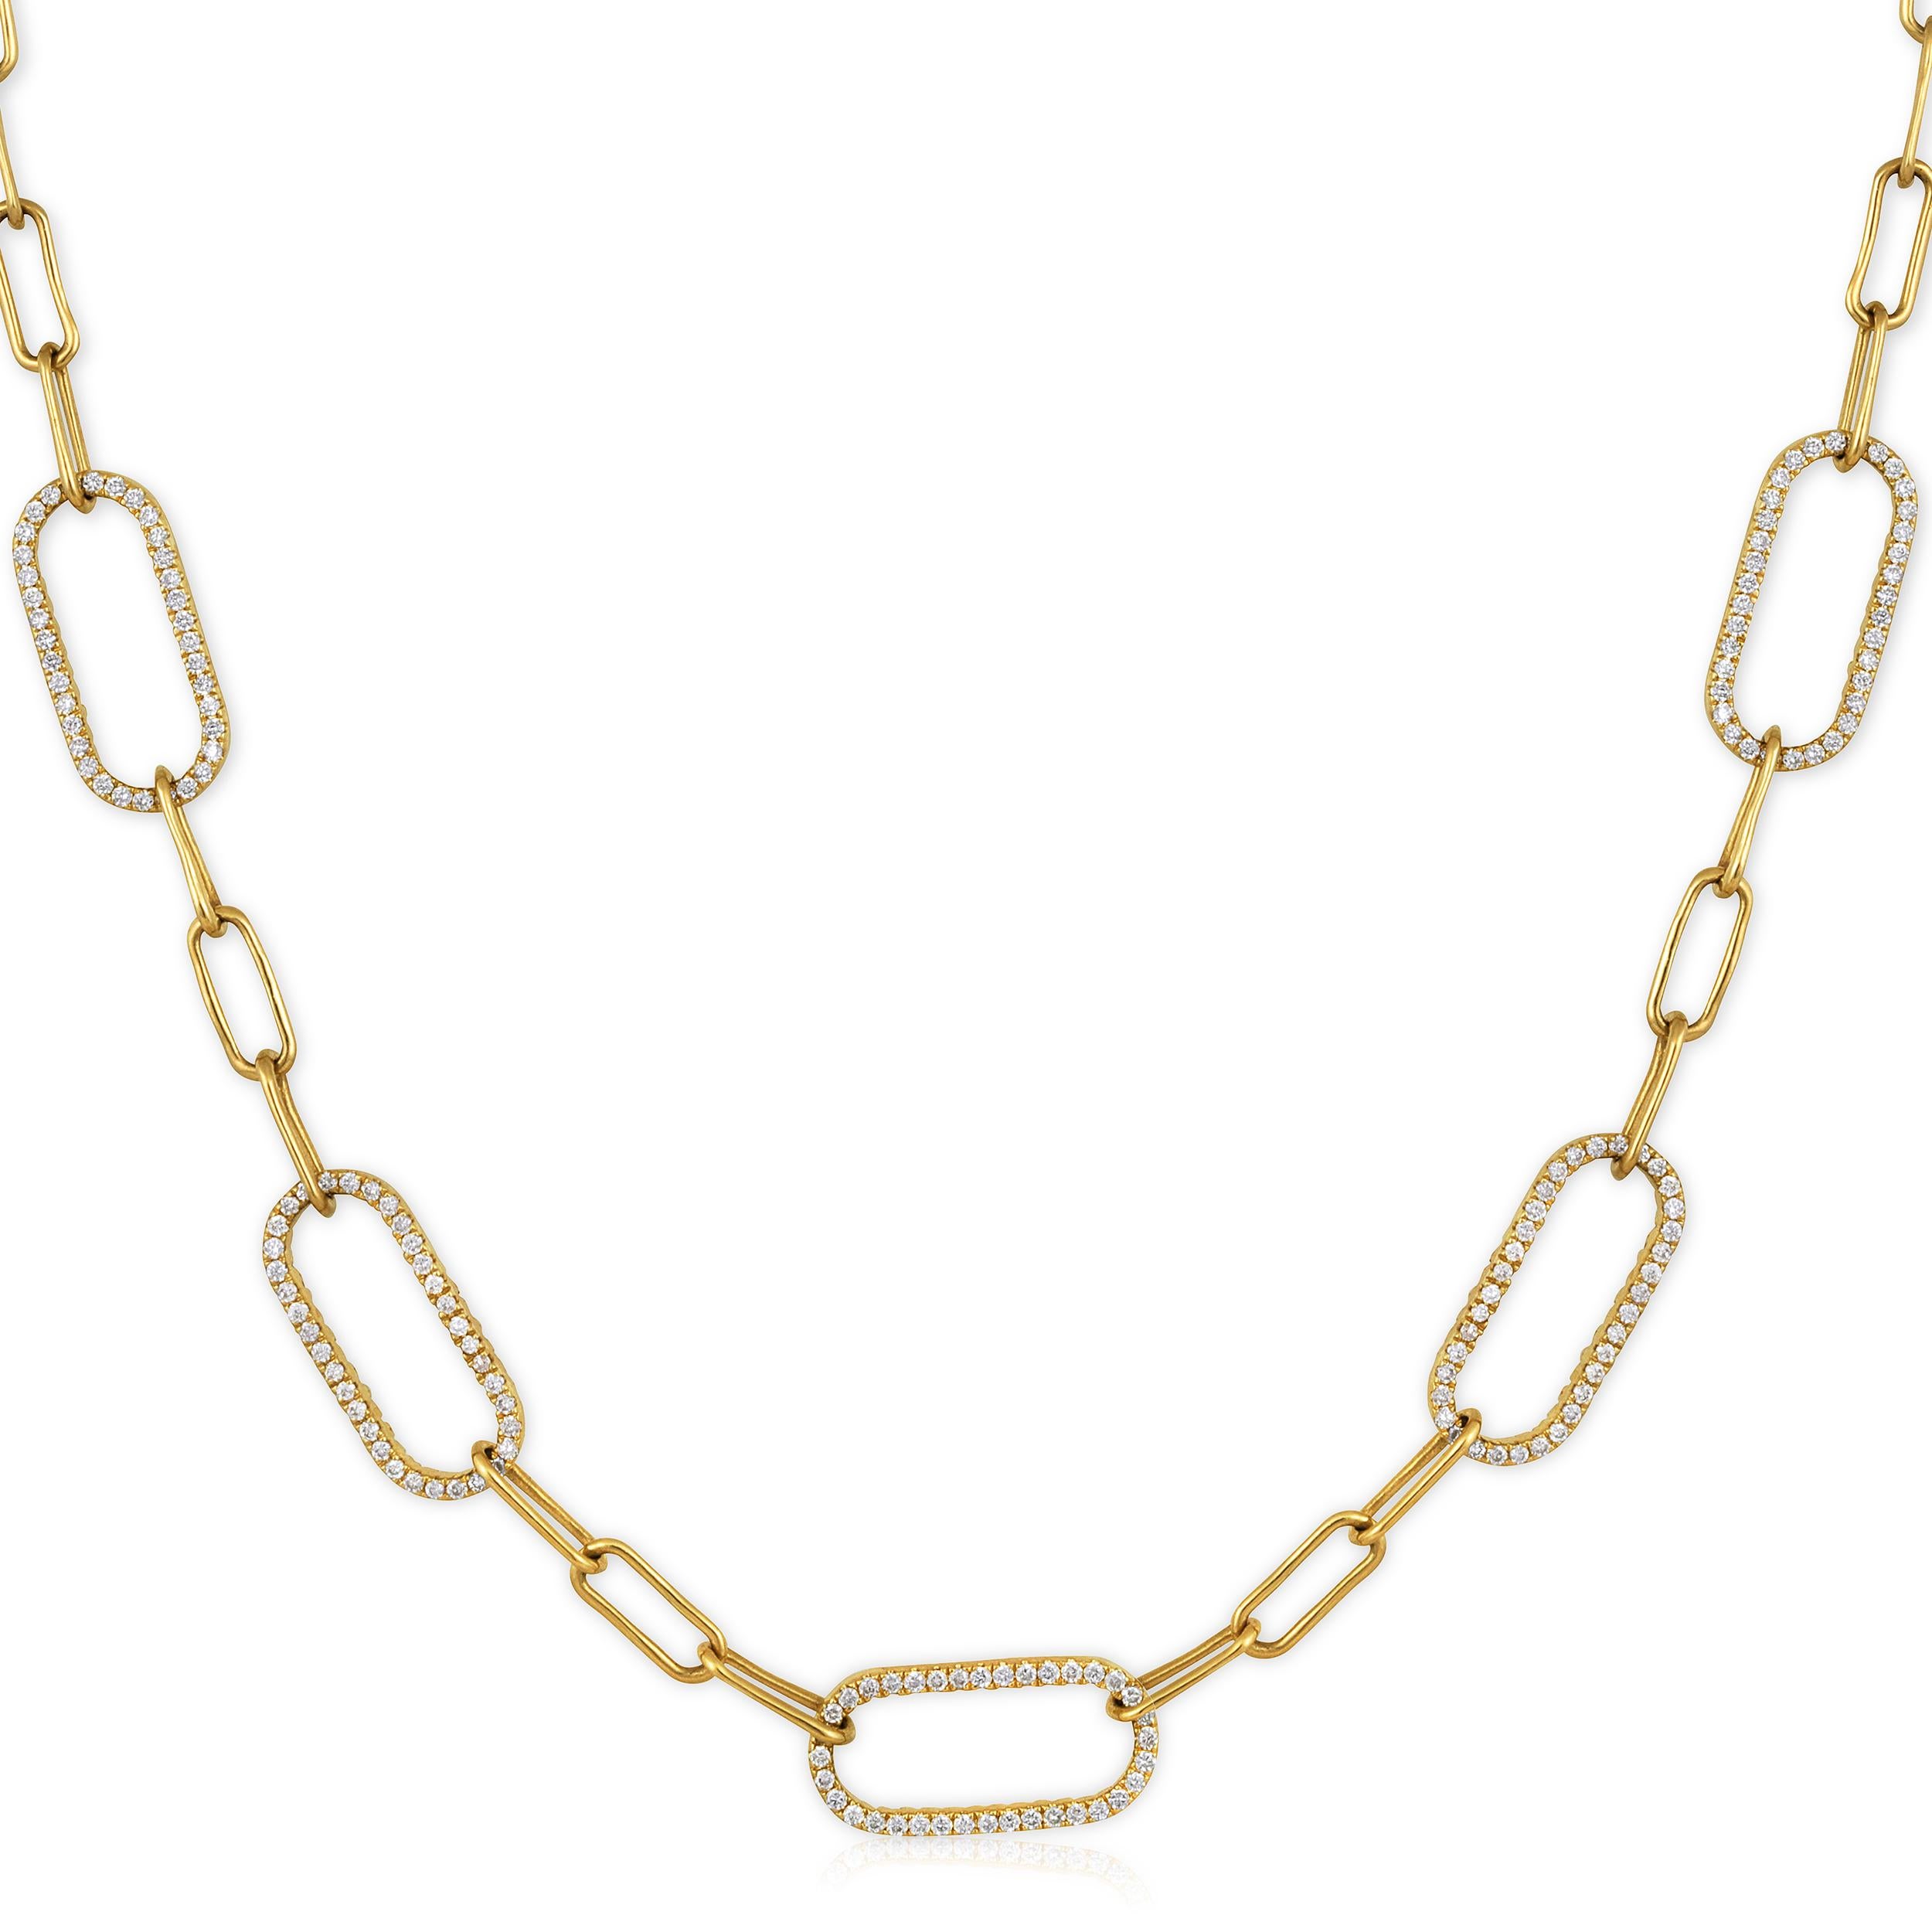 Crafted in 6.01 grams of 14K Yellow Gold, the necklace contains 360 stones of Round Natural Diamonds with a total of 1.05 carat in F-G color and SI clarity. The necklace length is 18 inches.

CONTEMPORARY AND TIMELESS ESSENCE: Crafted in